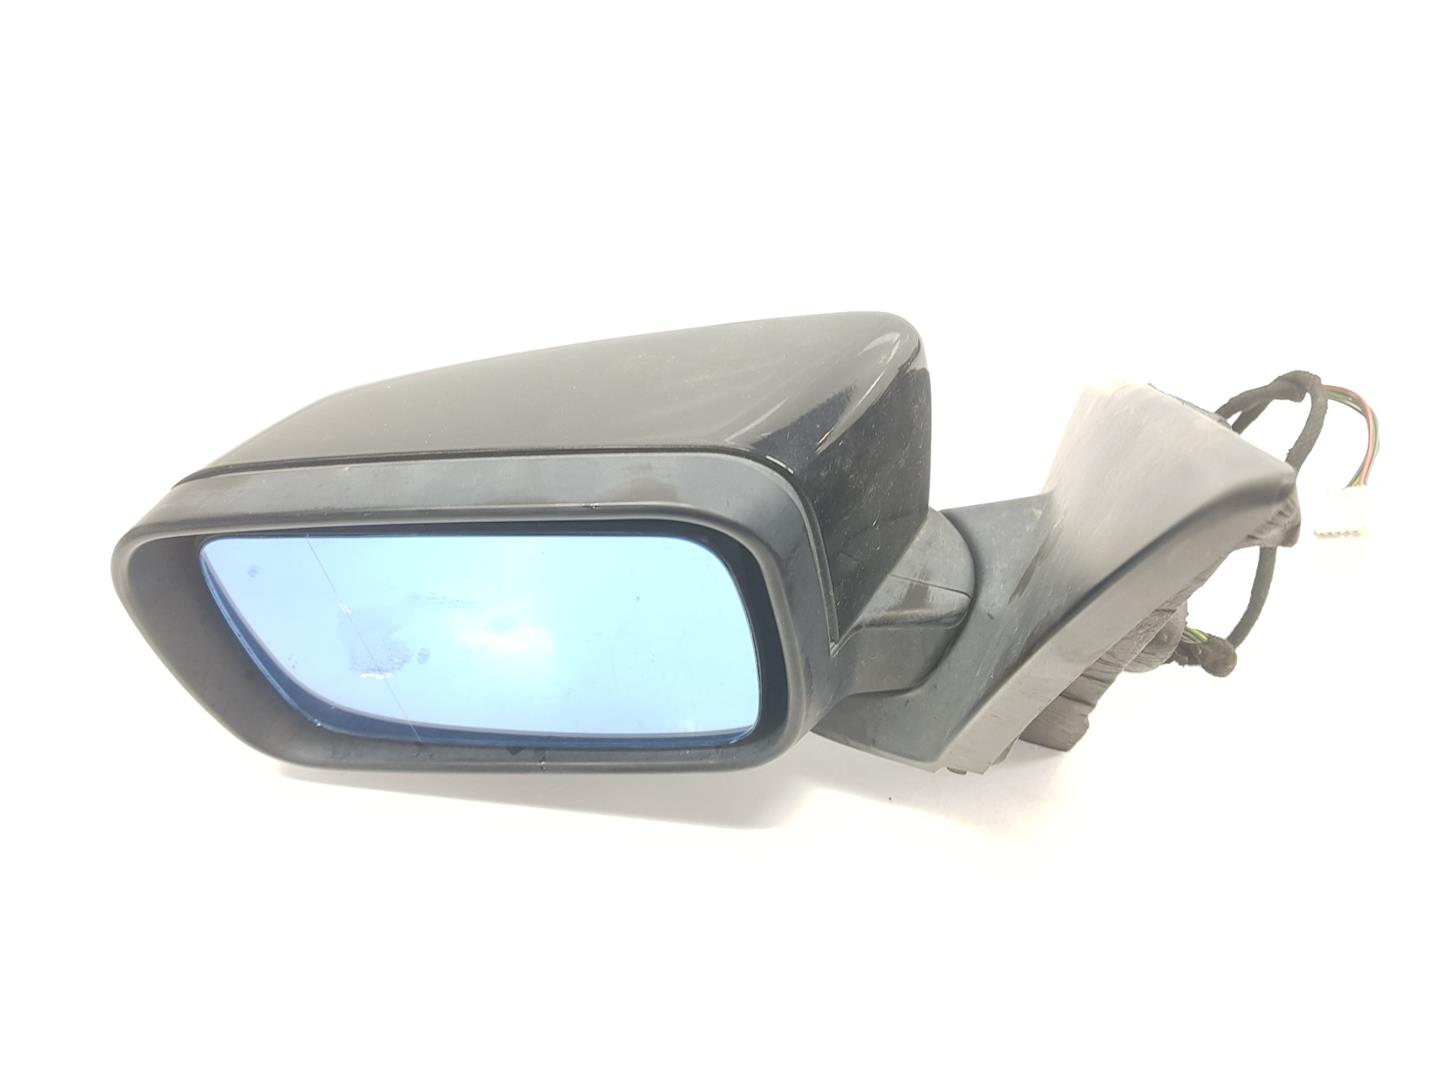 BMW 3 Series E46 (1997-2006) Left Side Wing Mirror 51167011937, 51167011937 23051574